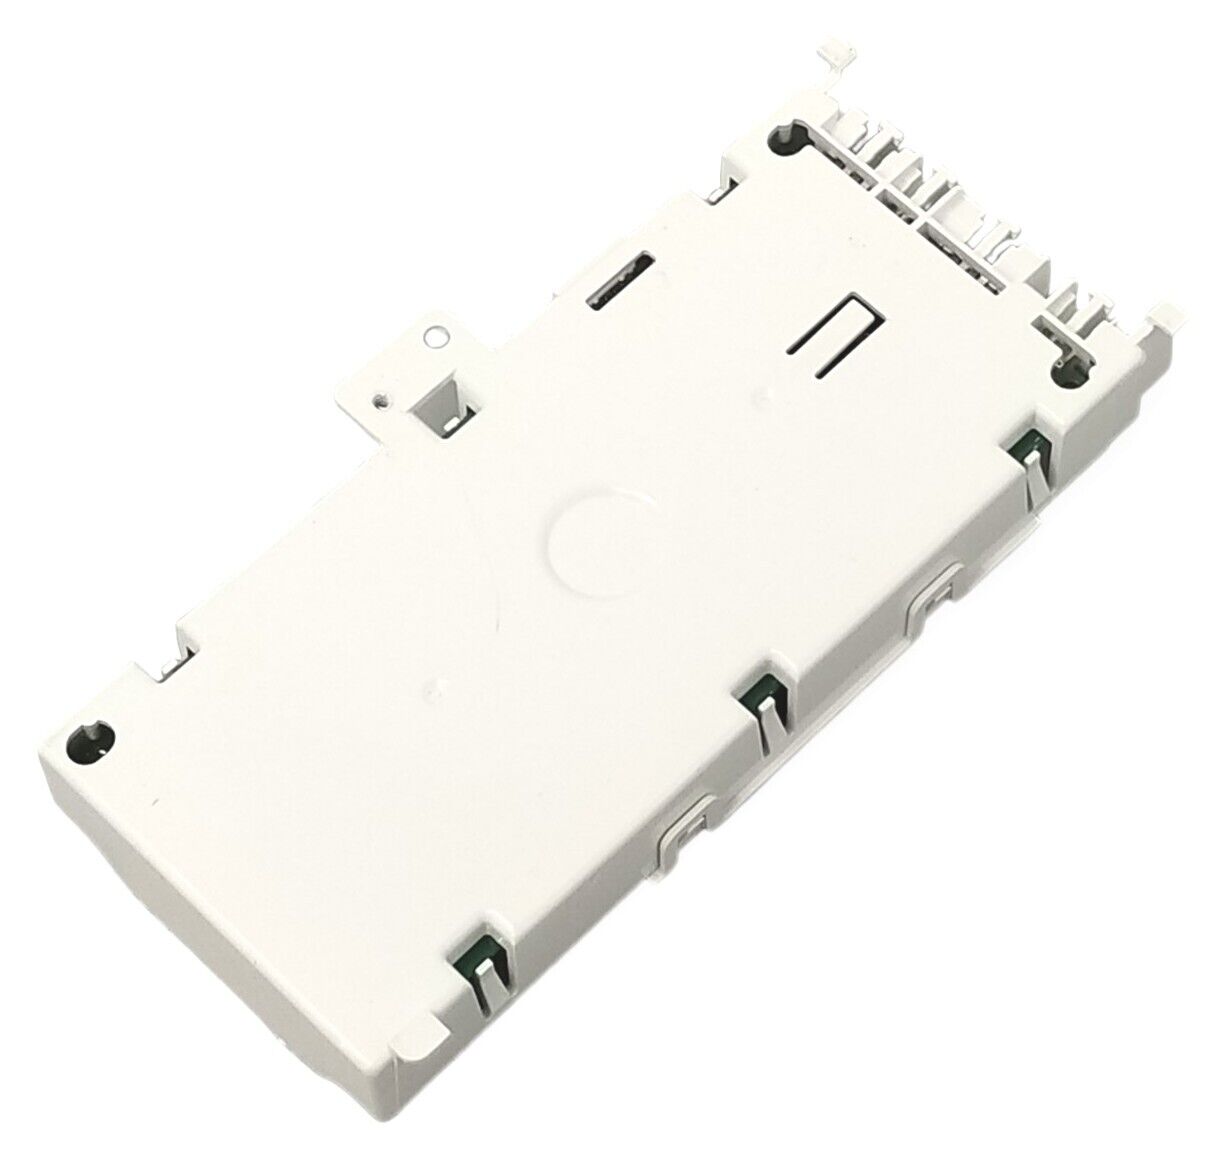 OEM Replacement for Whirlpool Dryer Control W10118243